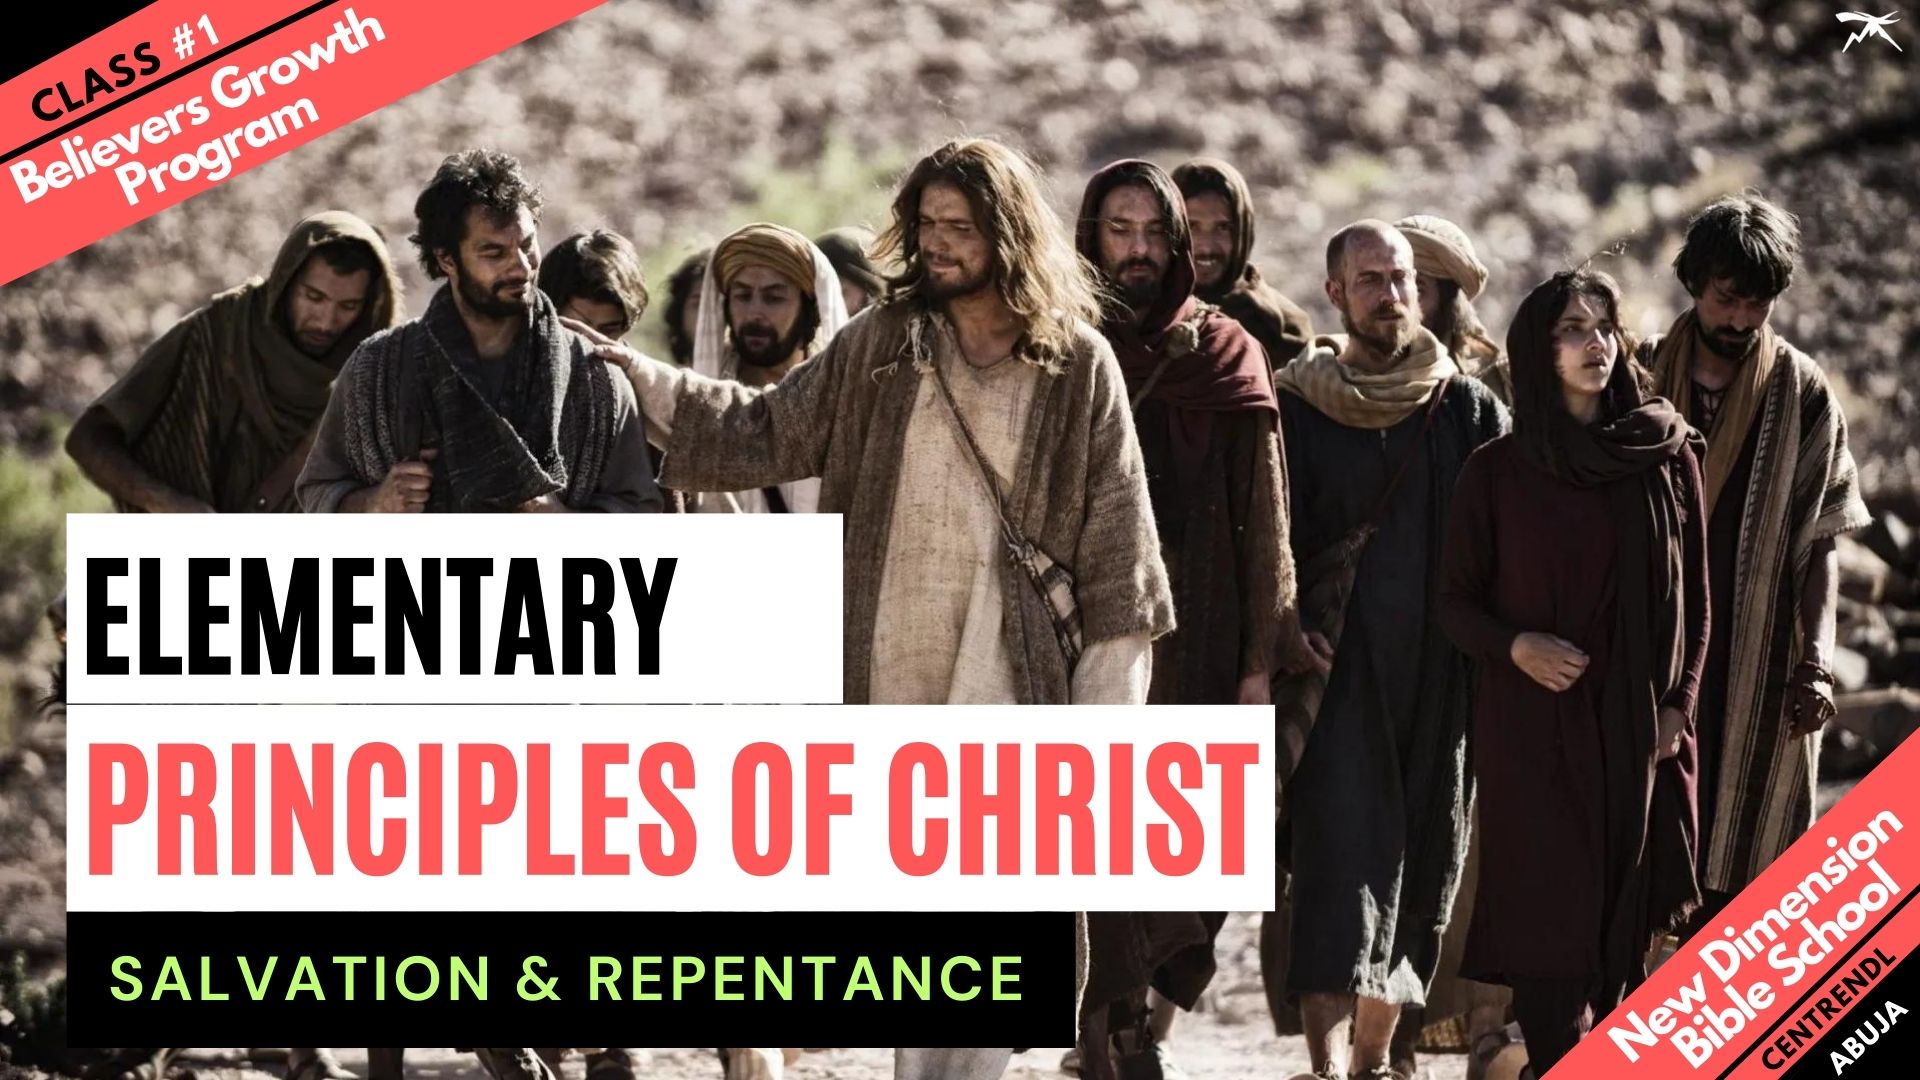 Elementary Principles of Christ (I): Salvation And Repentance from Dead Works